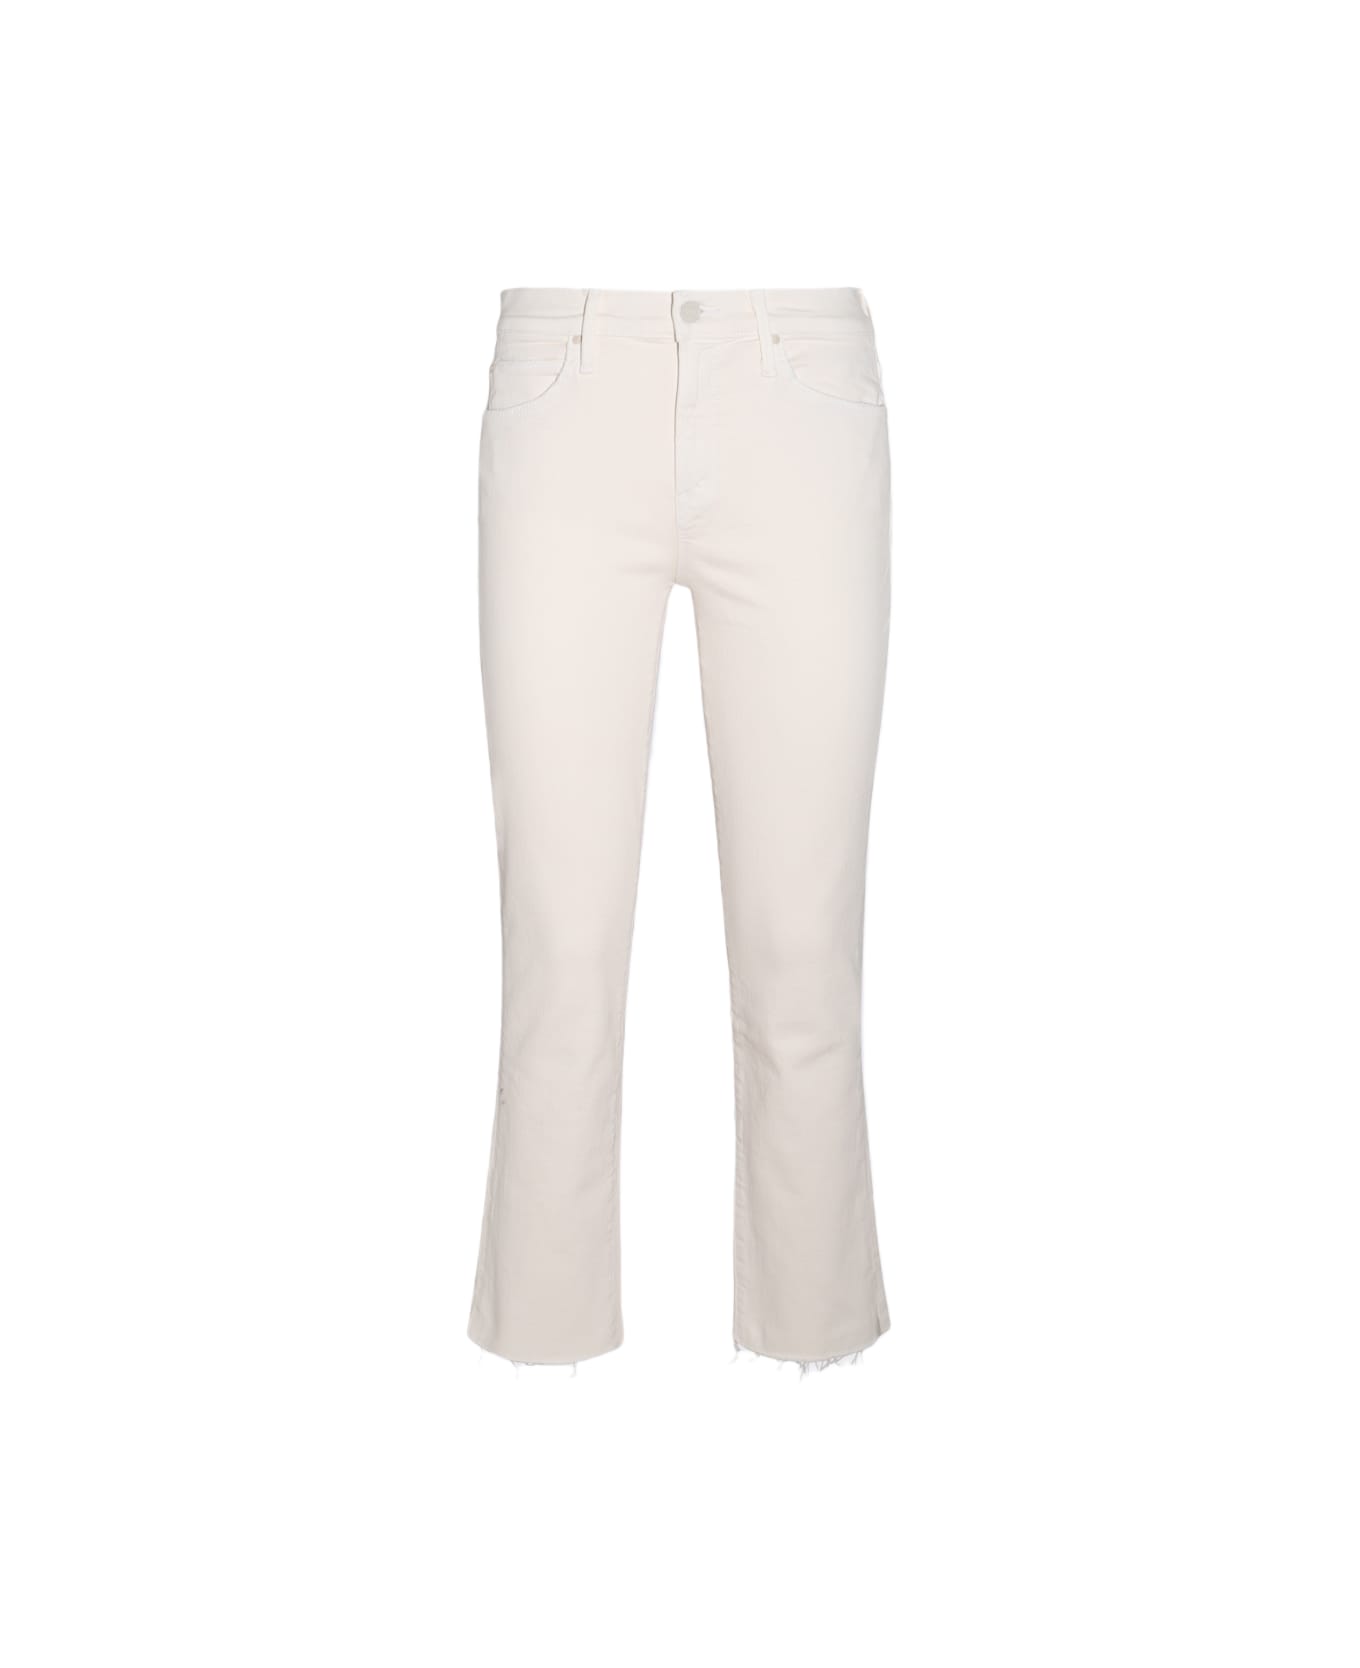 Mother Cream Denim Cropped The Raskal Ripped Ankle Jeans - White